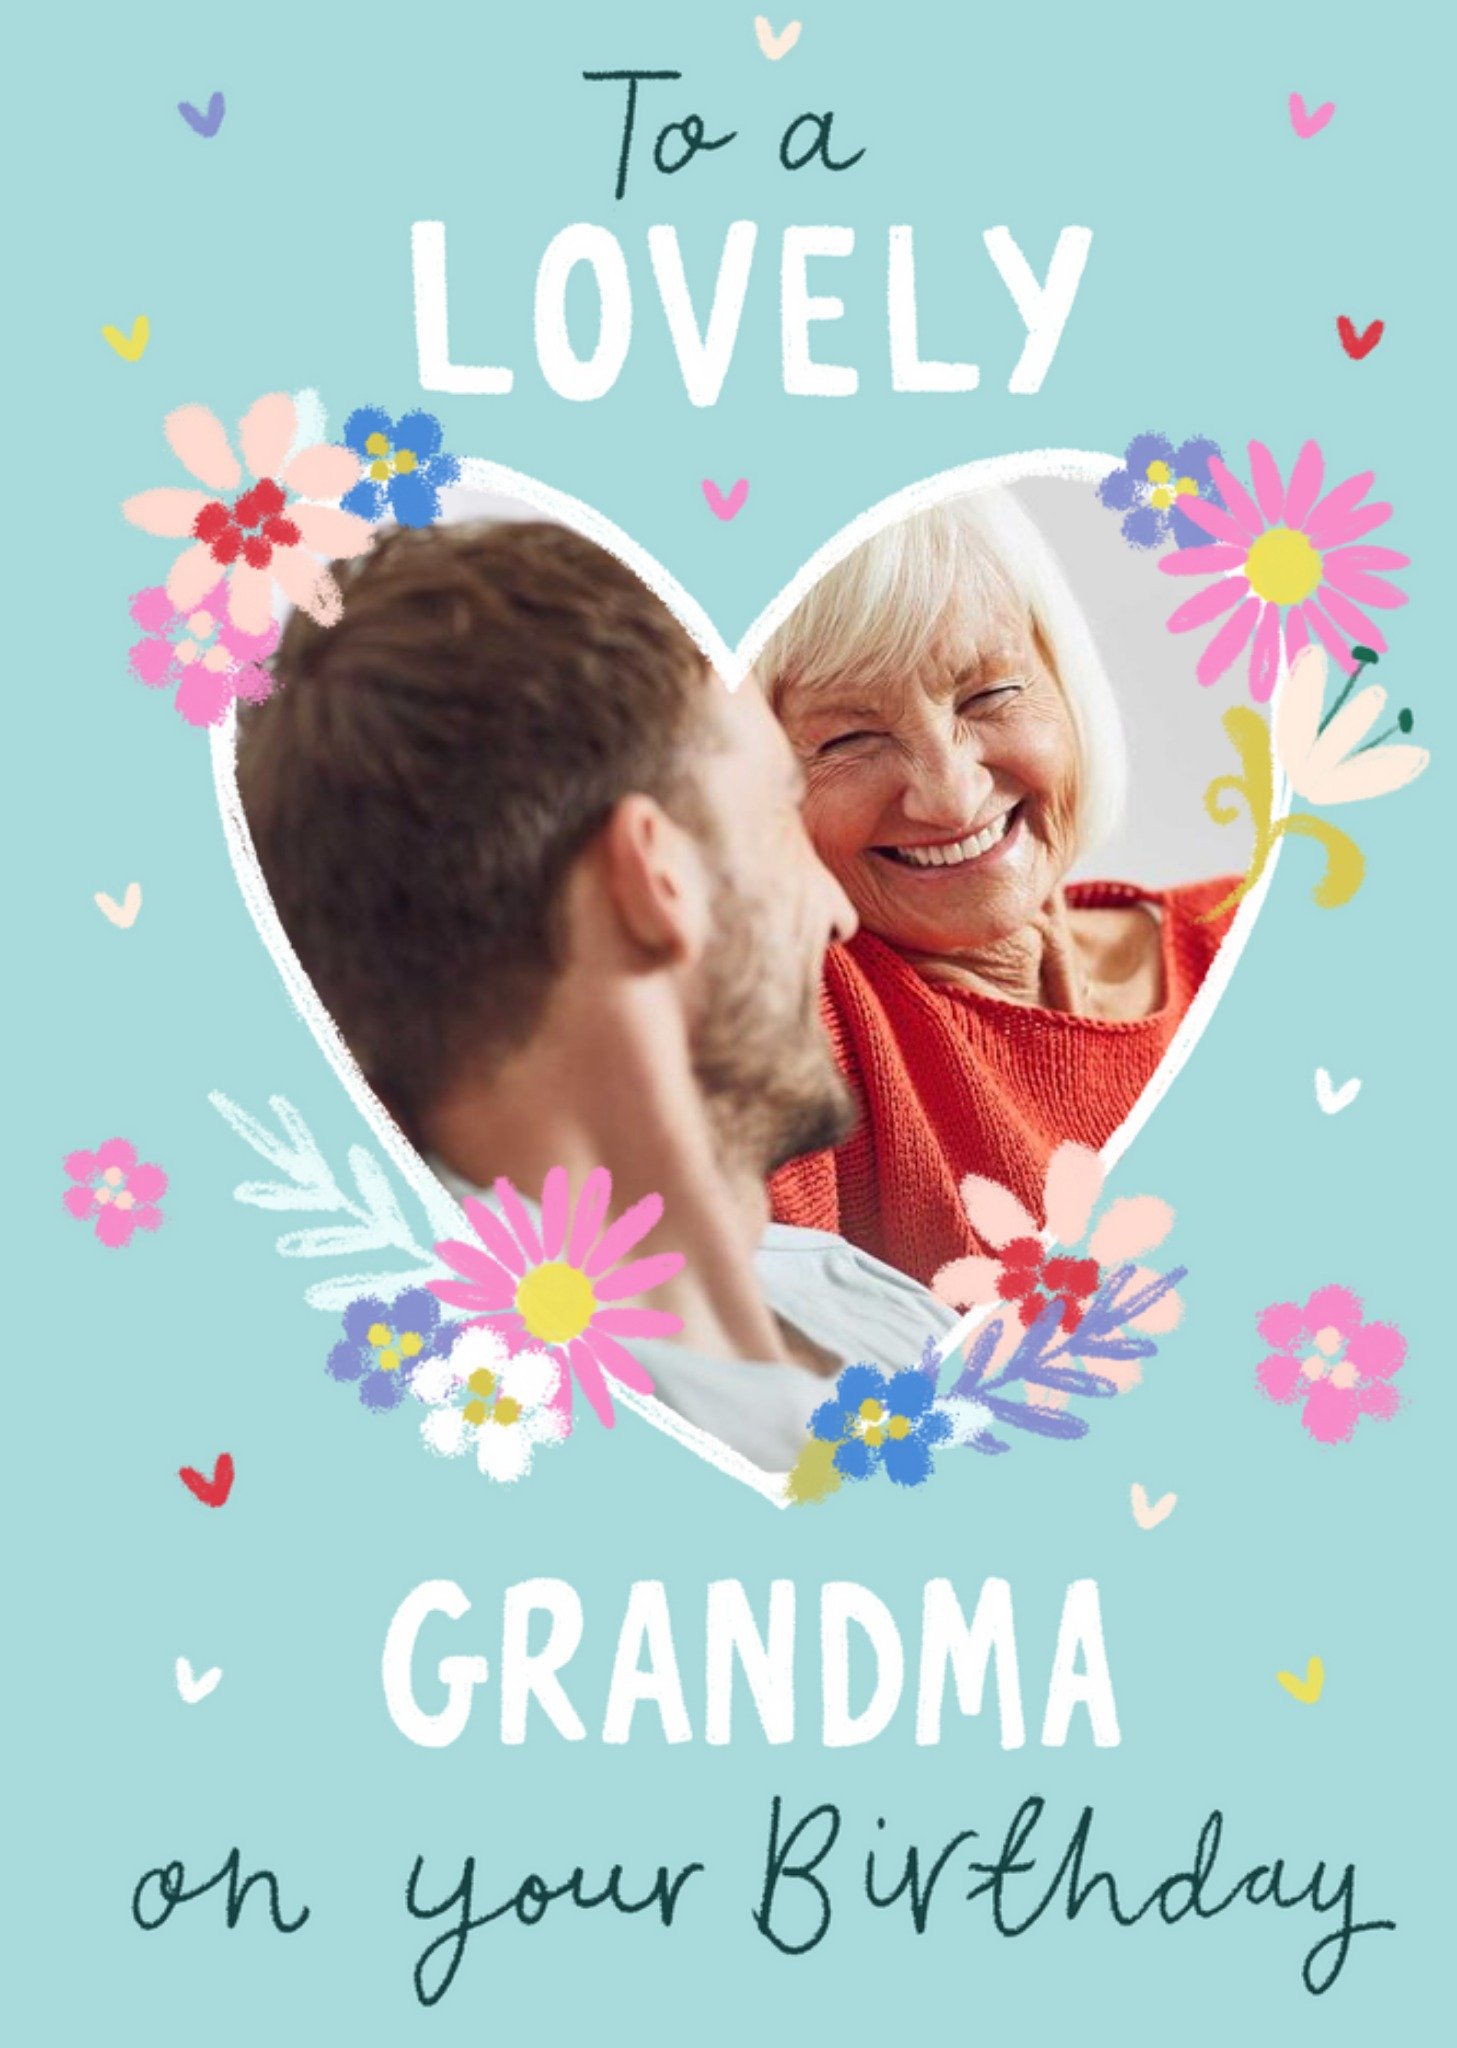 Moonpig Heart Photo Frame Surrounded By Colourful Flowers Lovely Grandma Photo Upload Birthday Card,